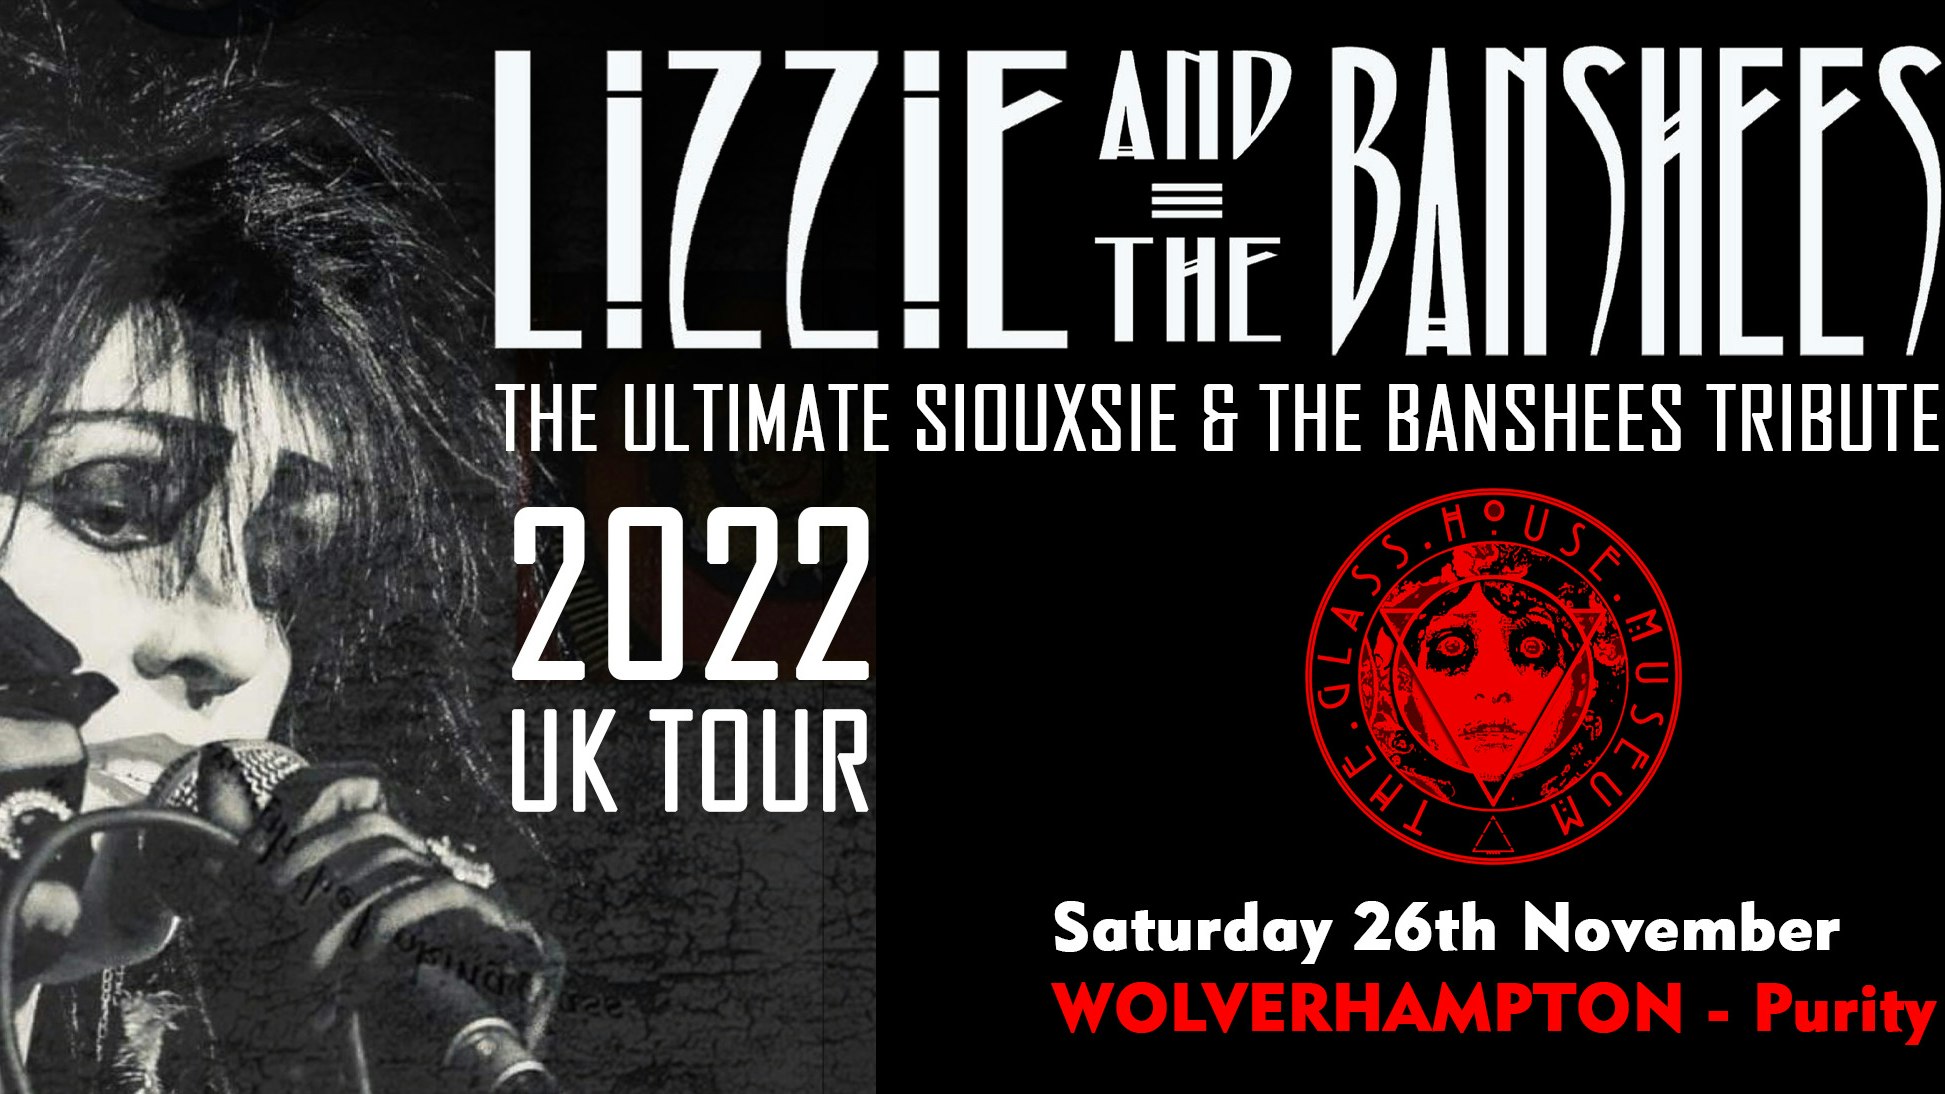 LIZZIE & THE BANSHEES – The Ultimate Siouxsie & The Banshees Tribute + The Glass House Museum